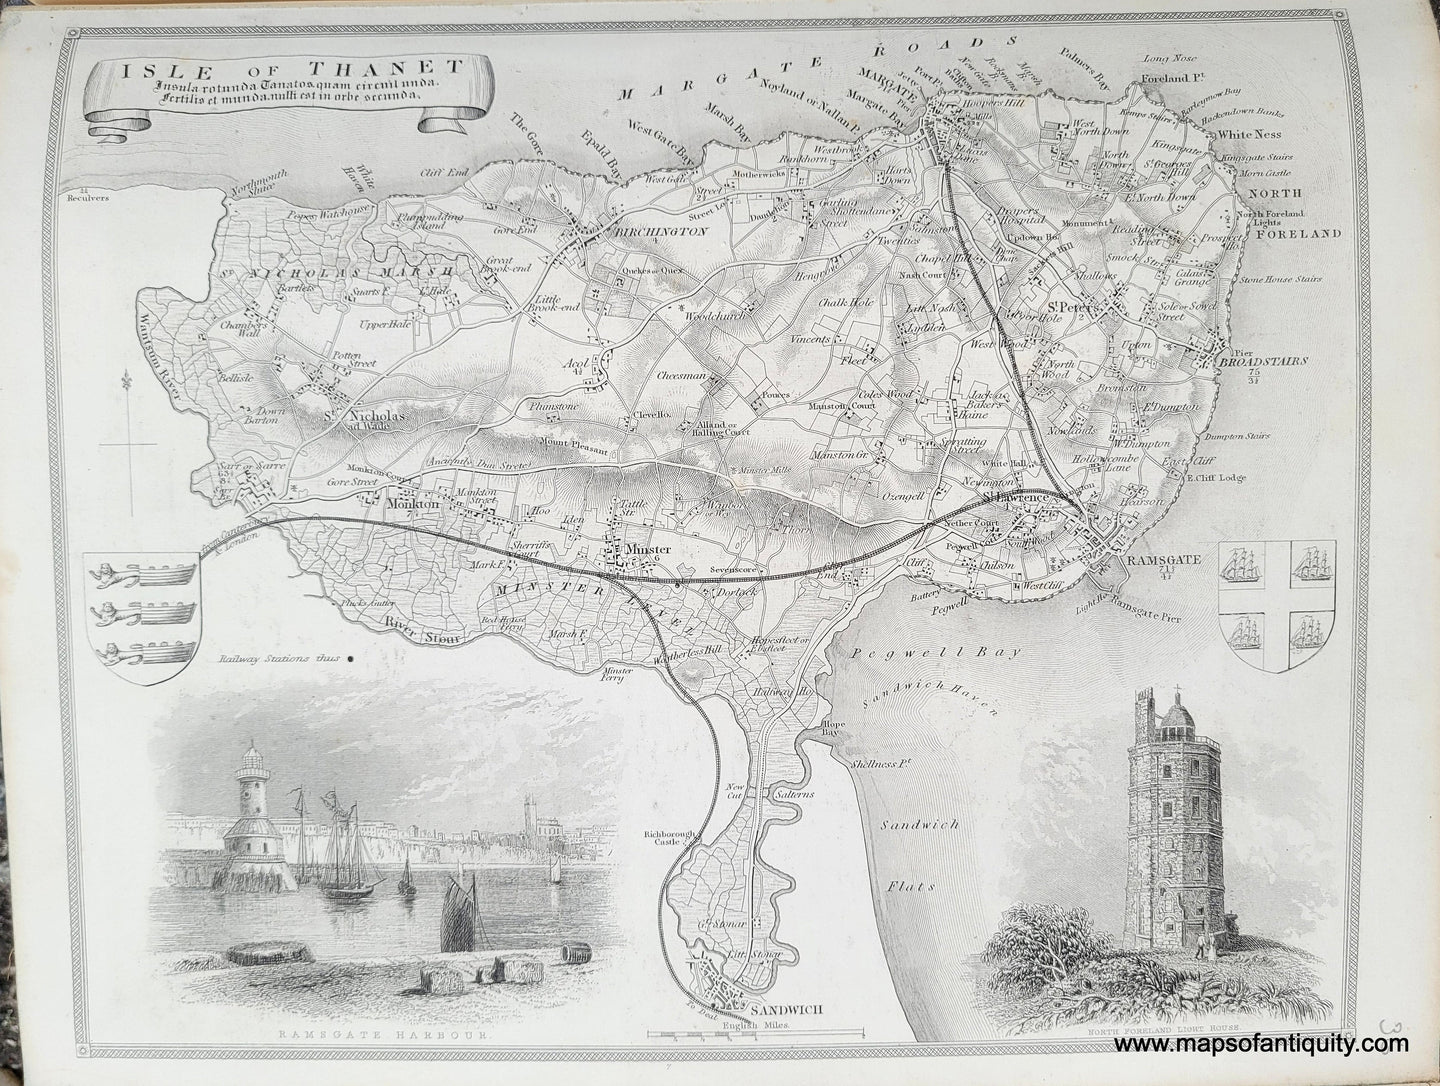 Genuine-Antique-Map-Isle-of-Thanet-1850-Virtue-Maps-Of-Antiquity